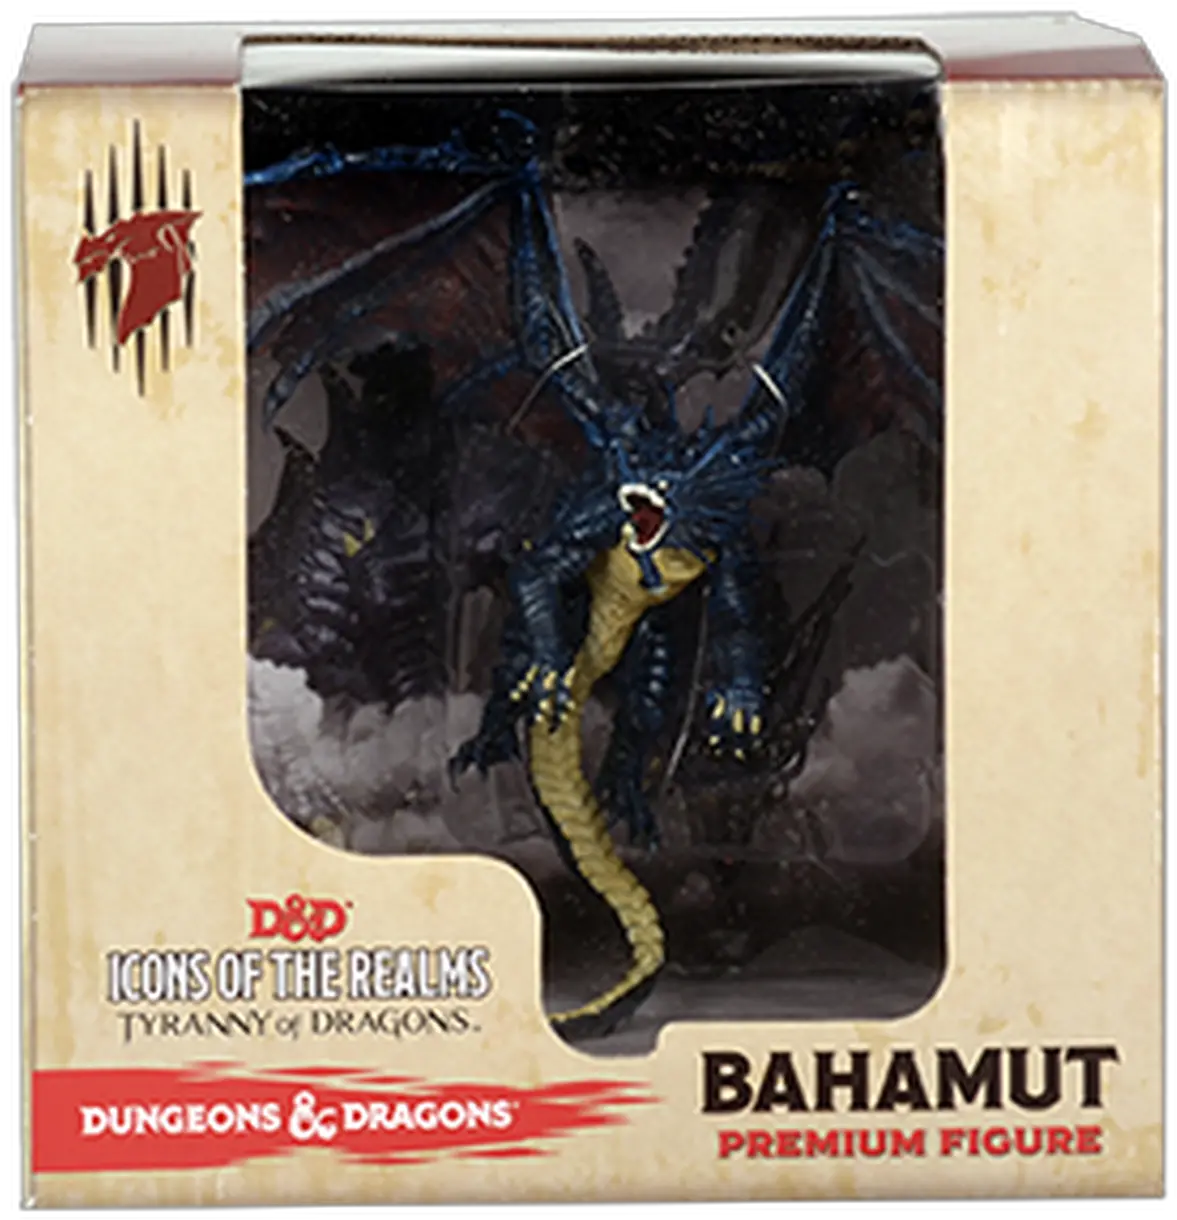 Du0026d Icons Of The Realms Tyranny Dragons Bahamut Bahamut Figure Png Lore Icon